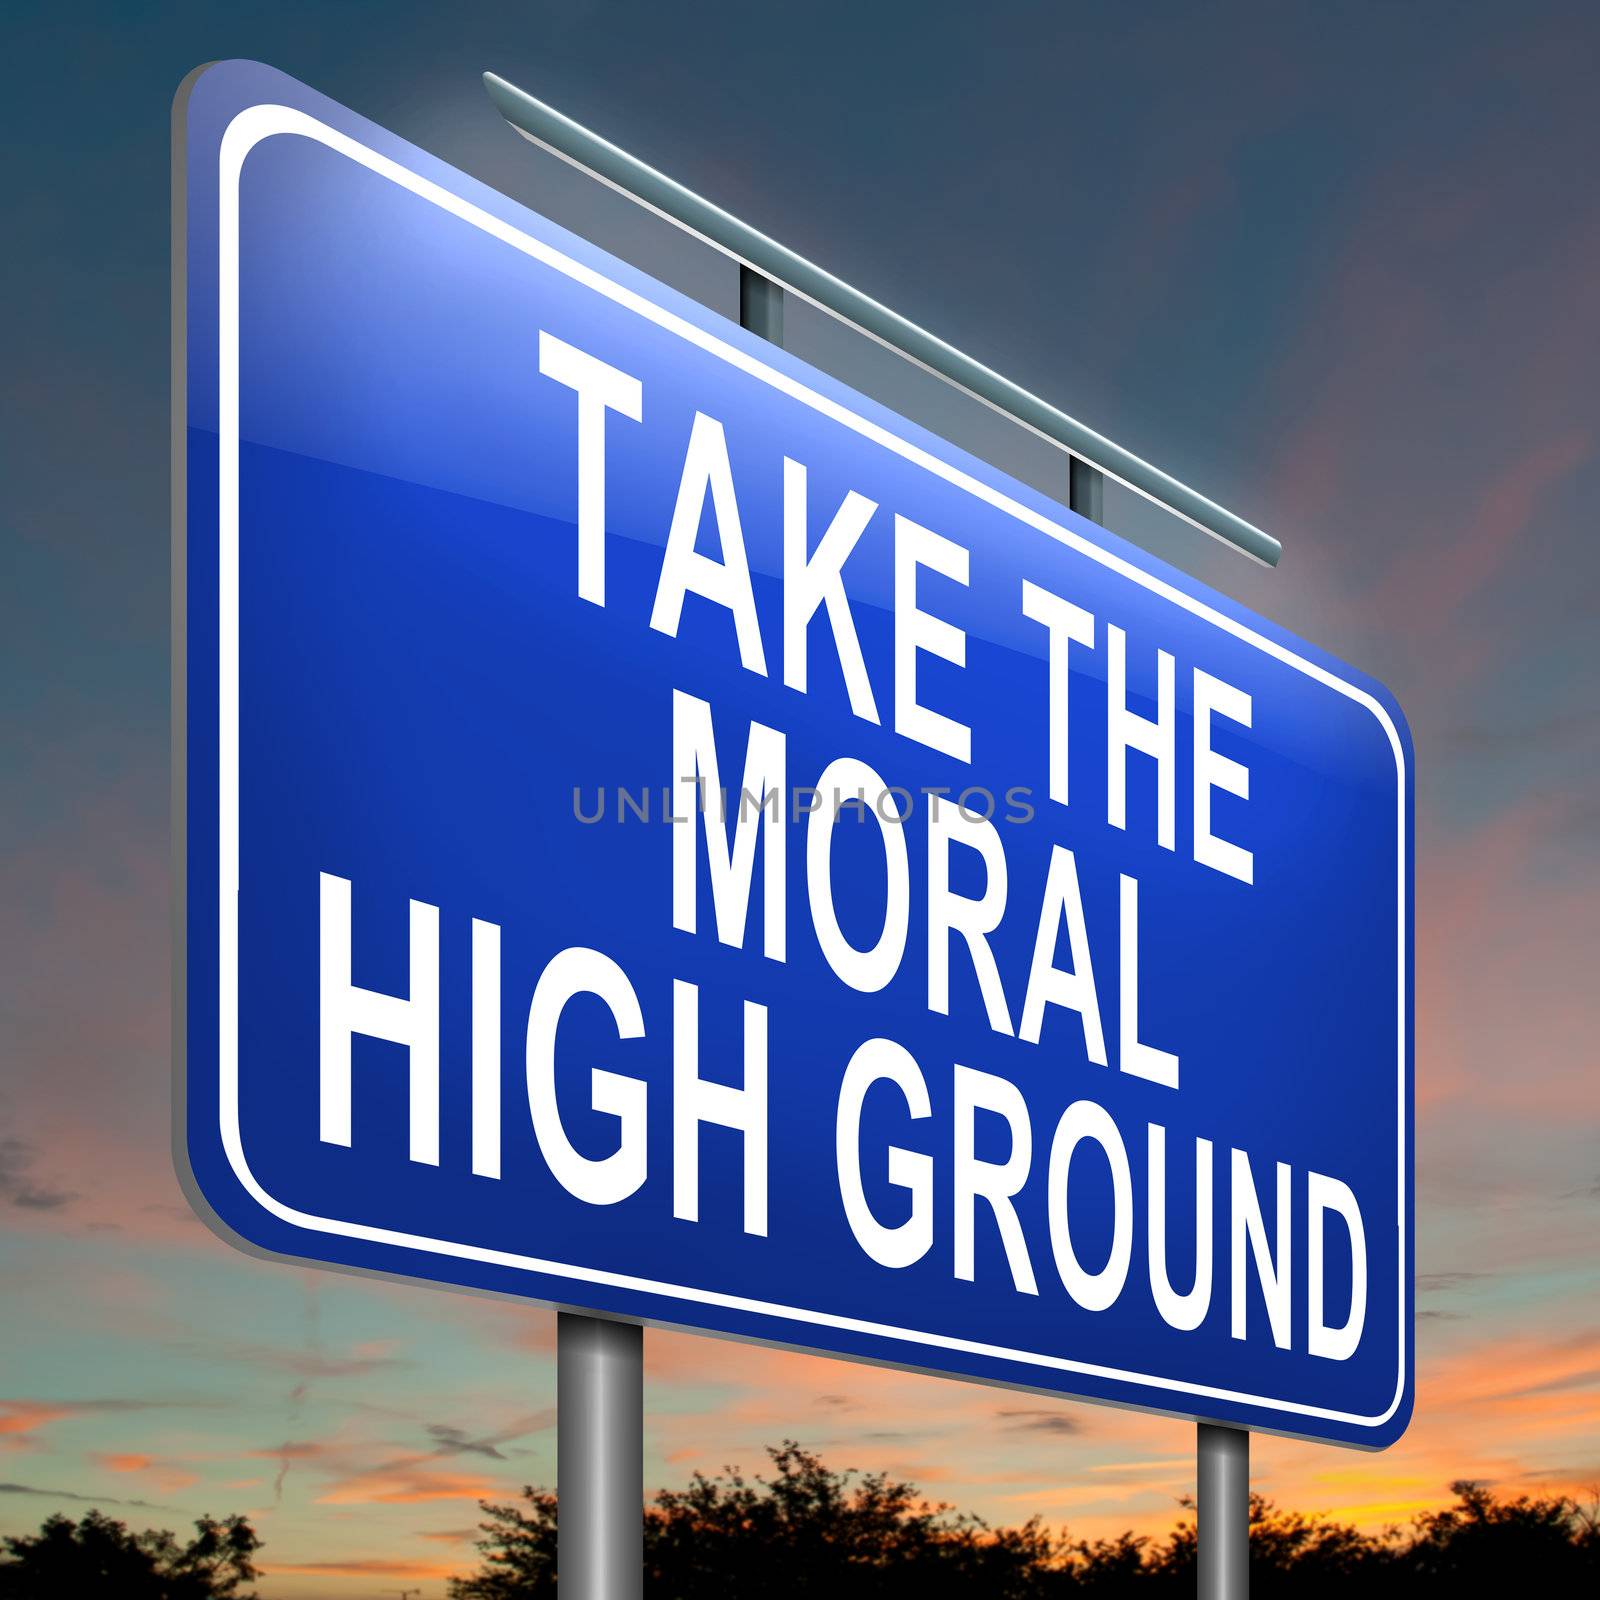 Moral high ground. by 72soul